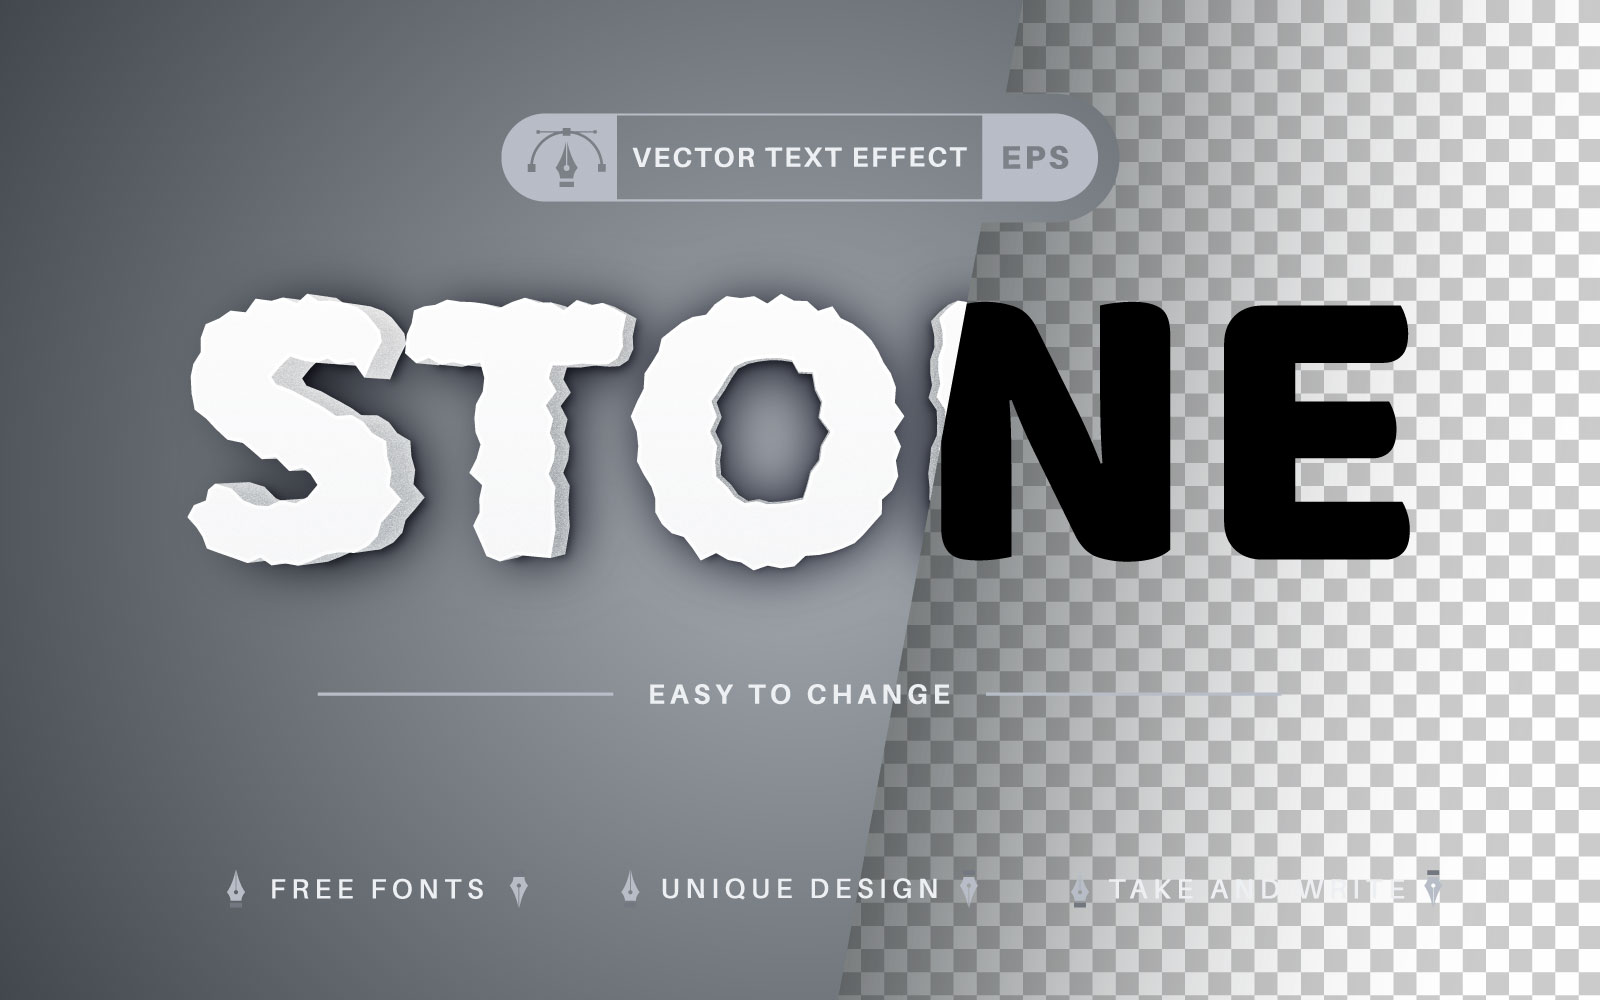 Stone - Editable Text Effect, Font Style